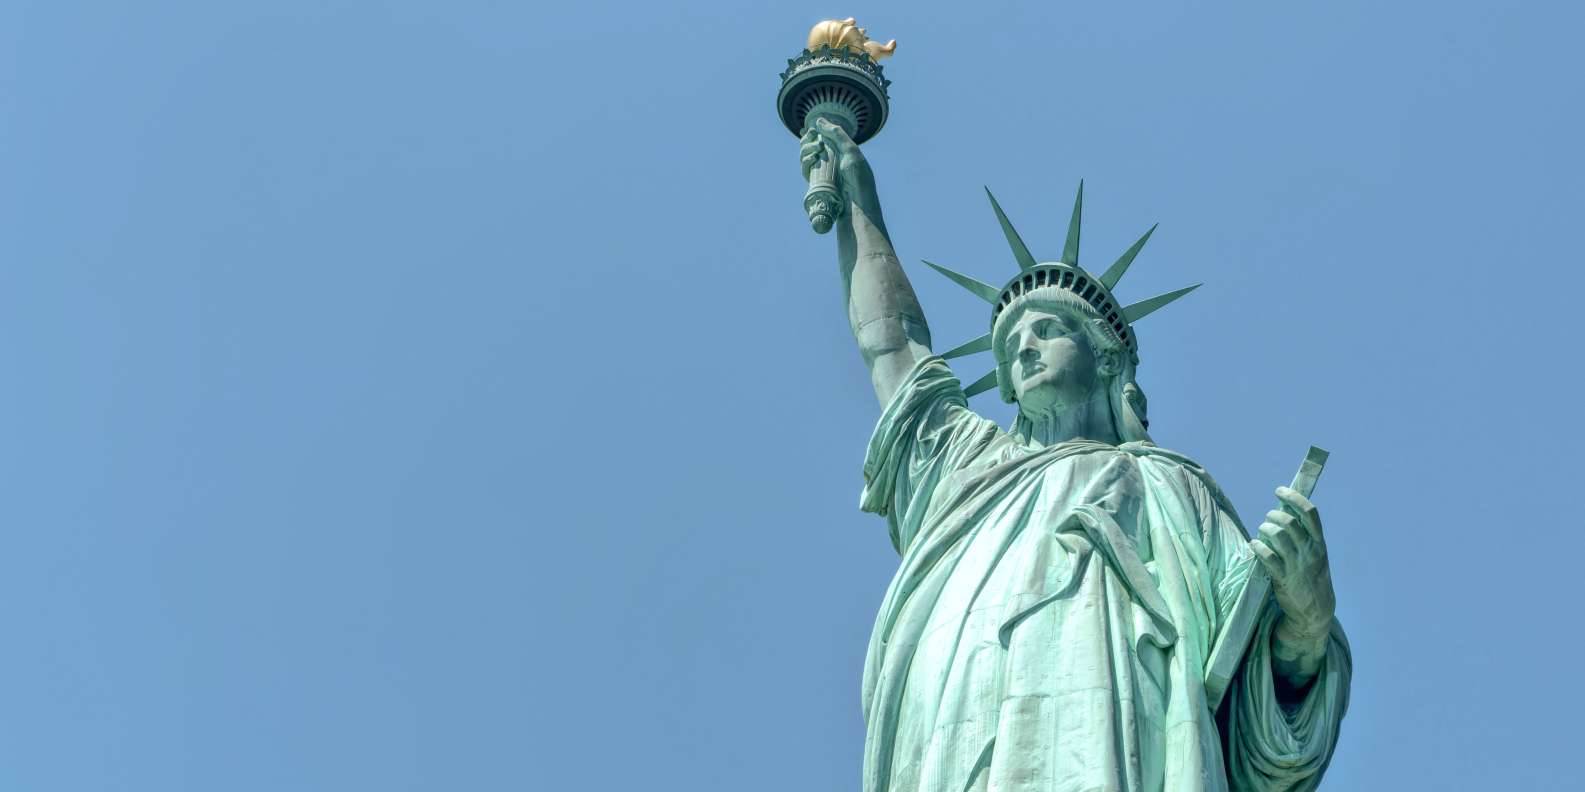 8 Statue of Liberty Facts to Know Before You Go